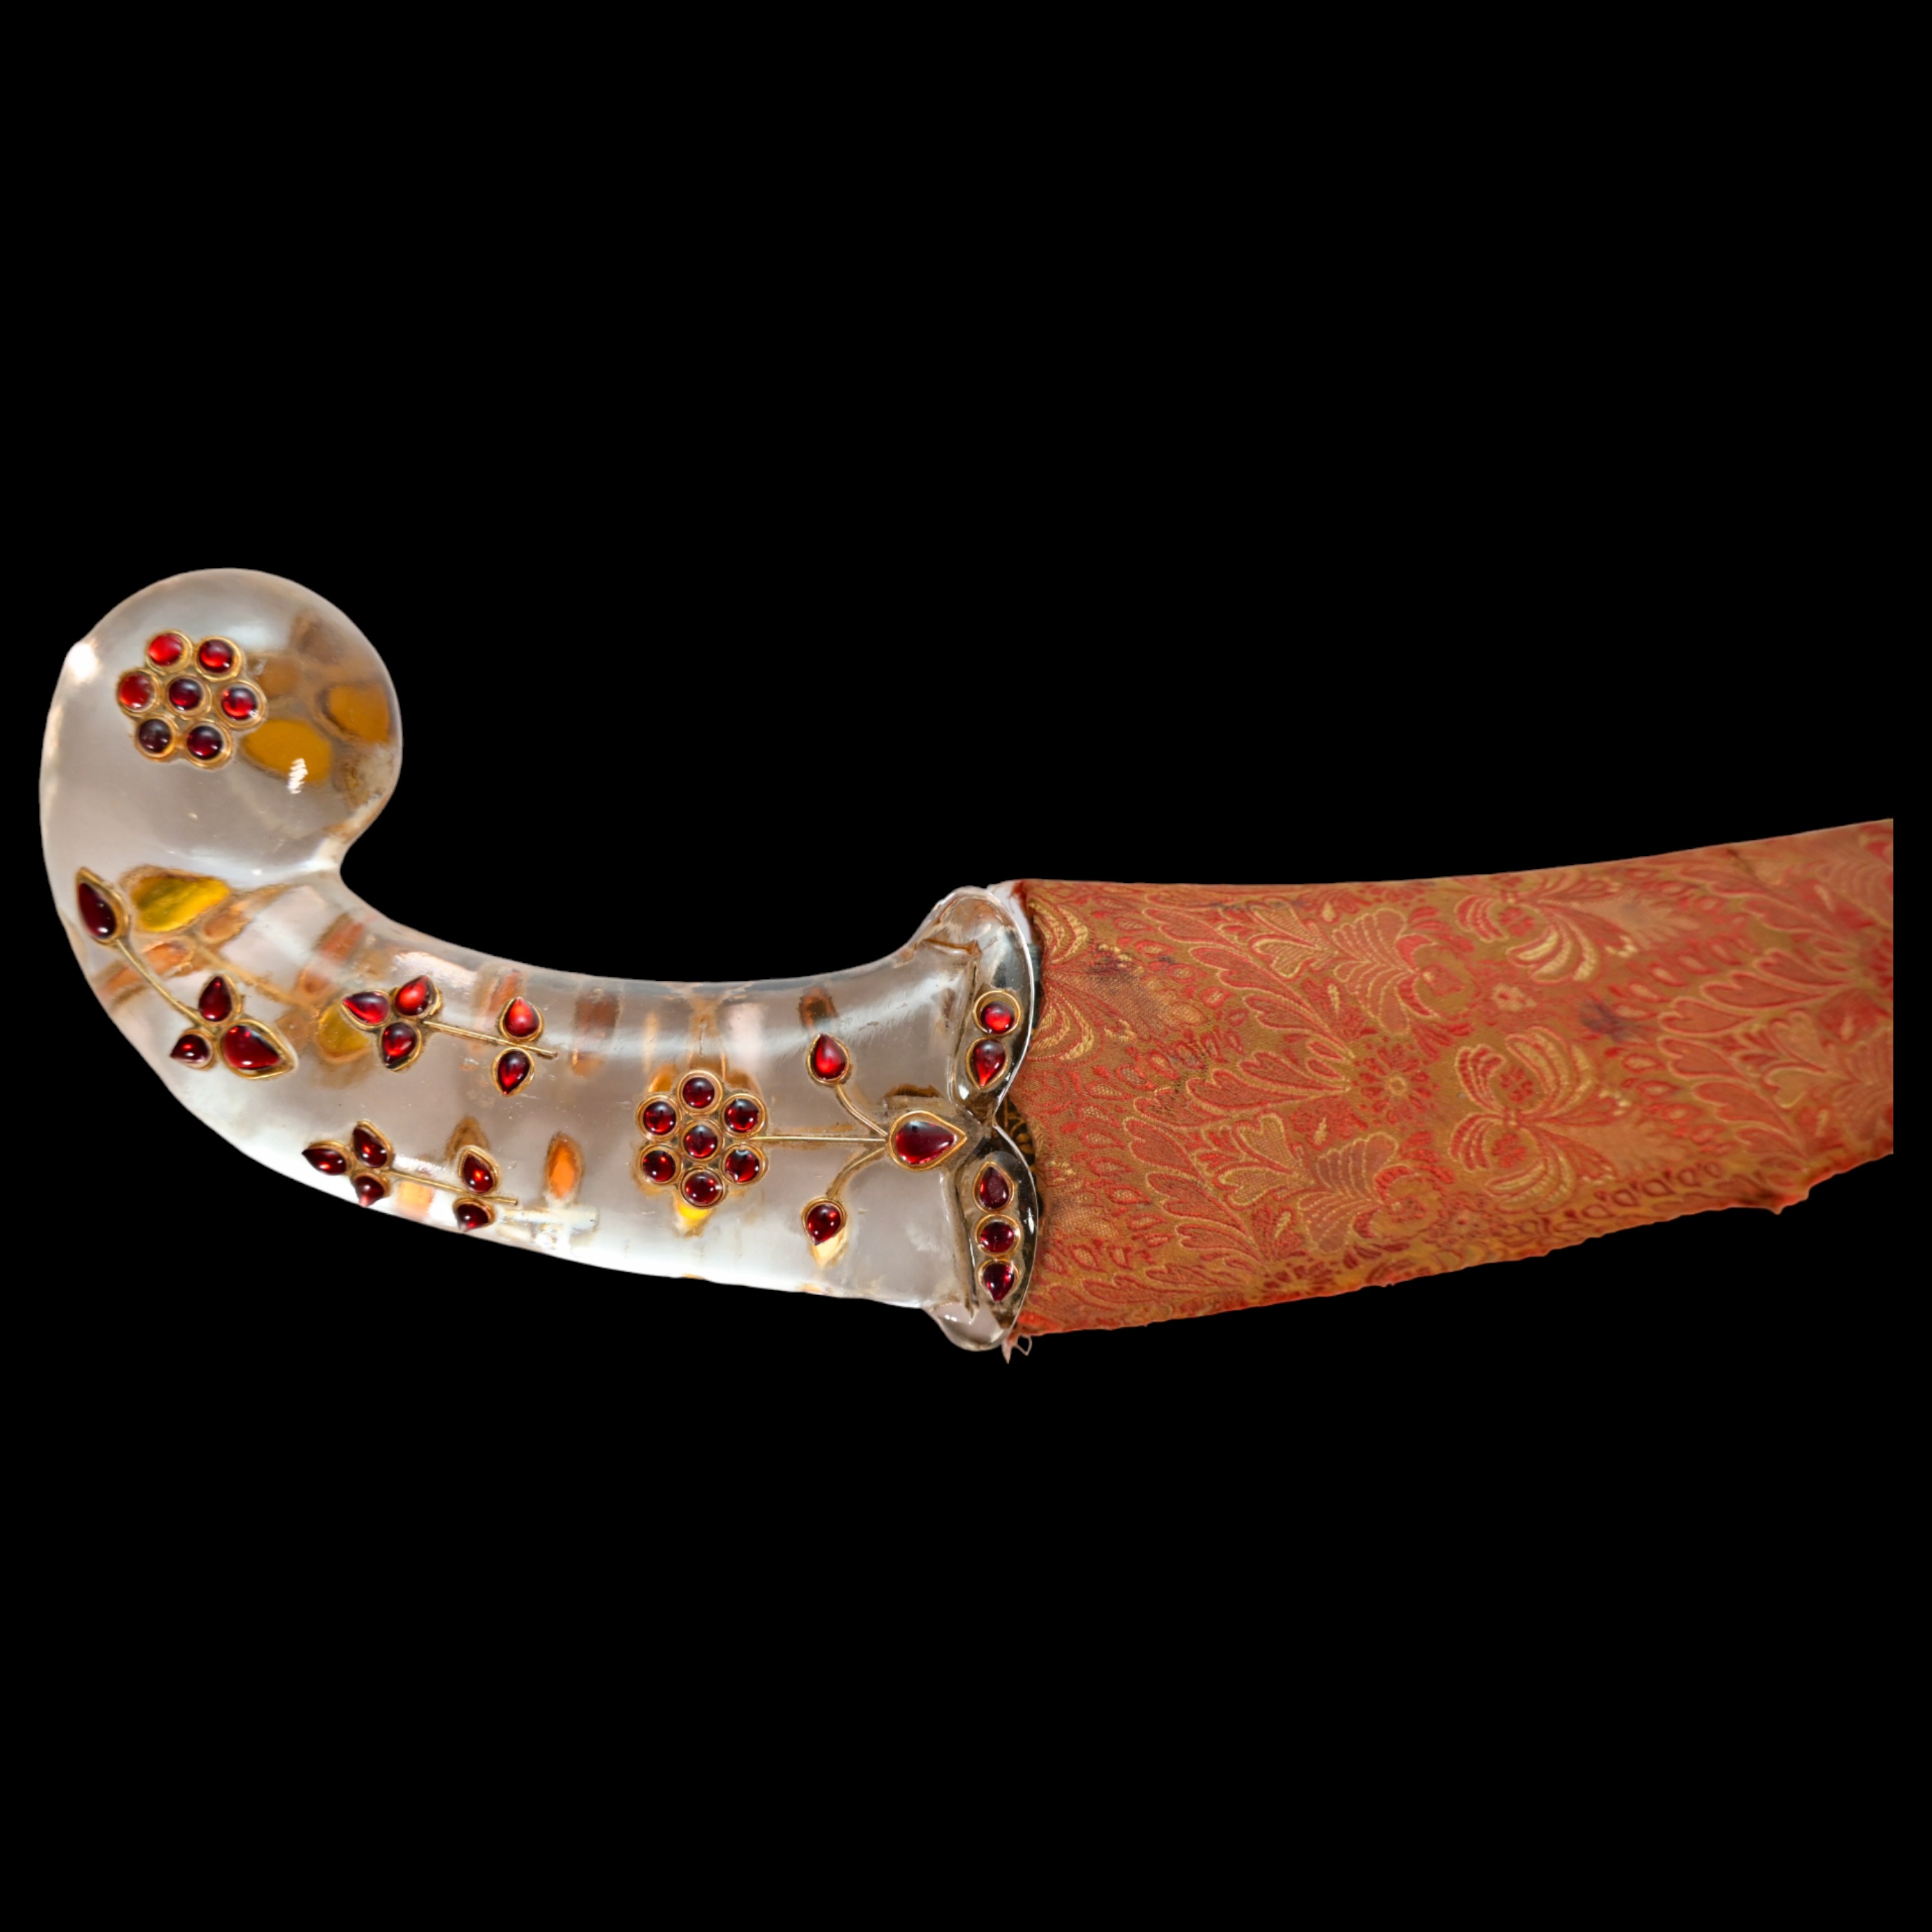 A Rare Mughal gem-set rock crystal hilted dagger with scabbard, India, 18th century. - Image 6 of 13